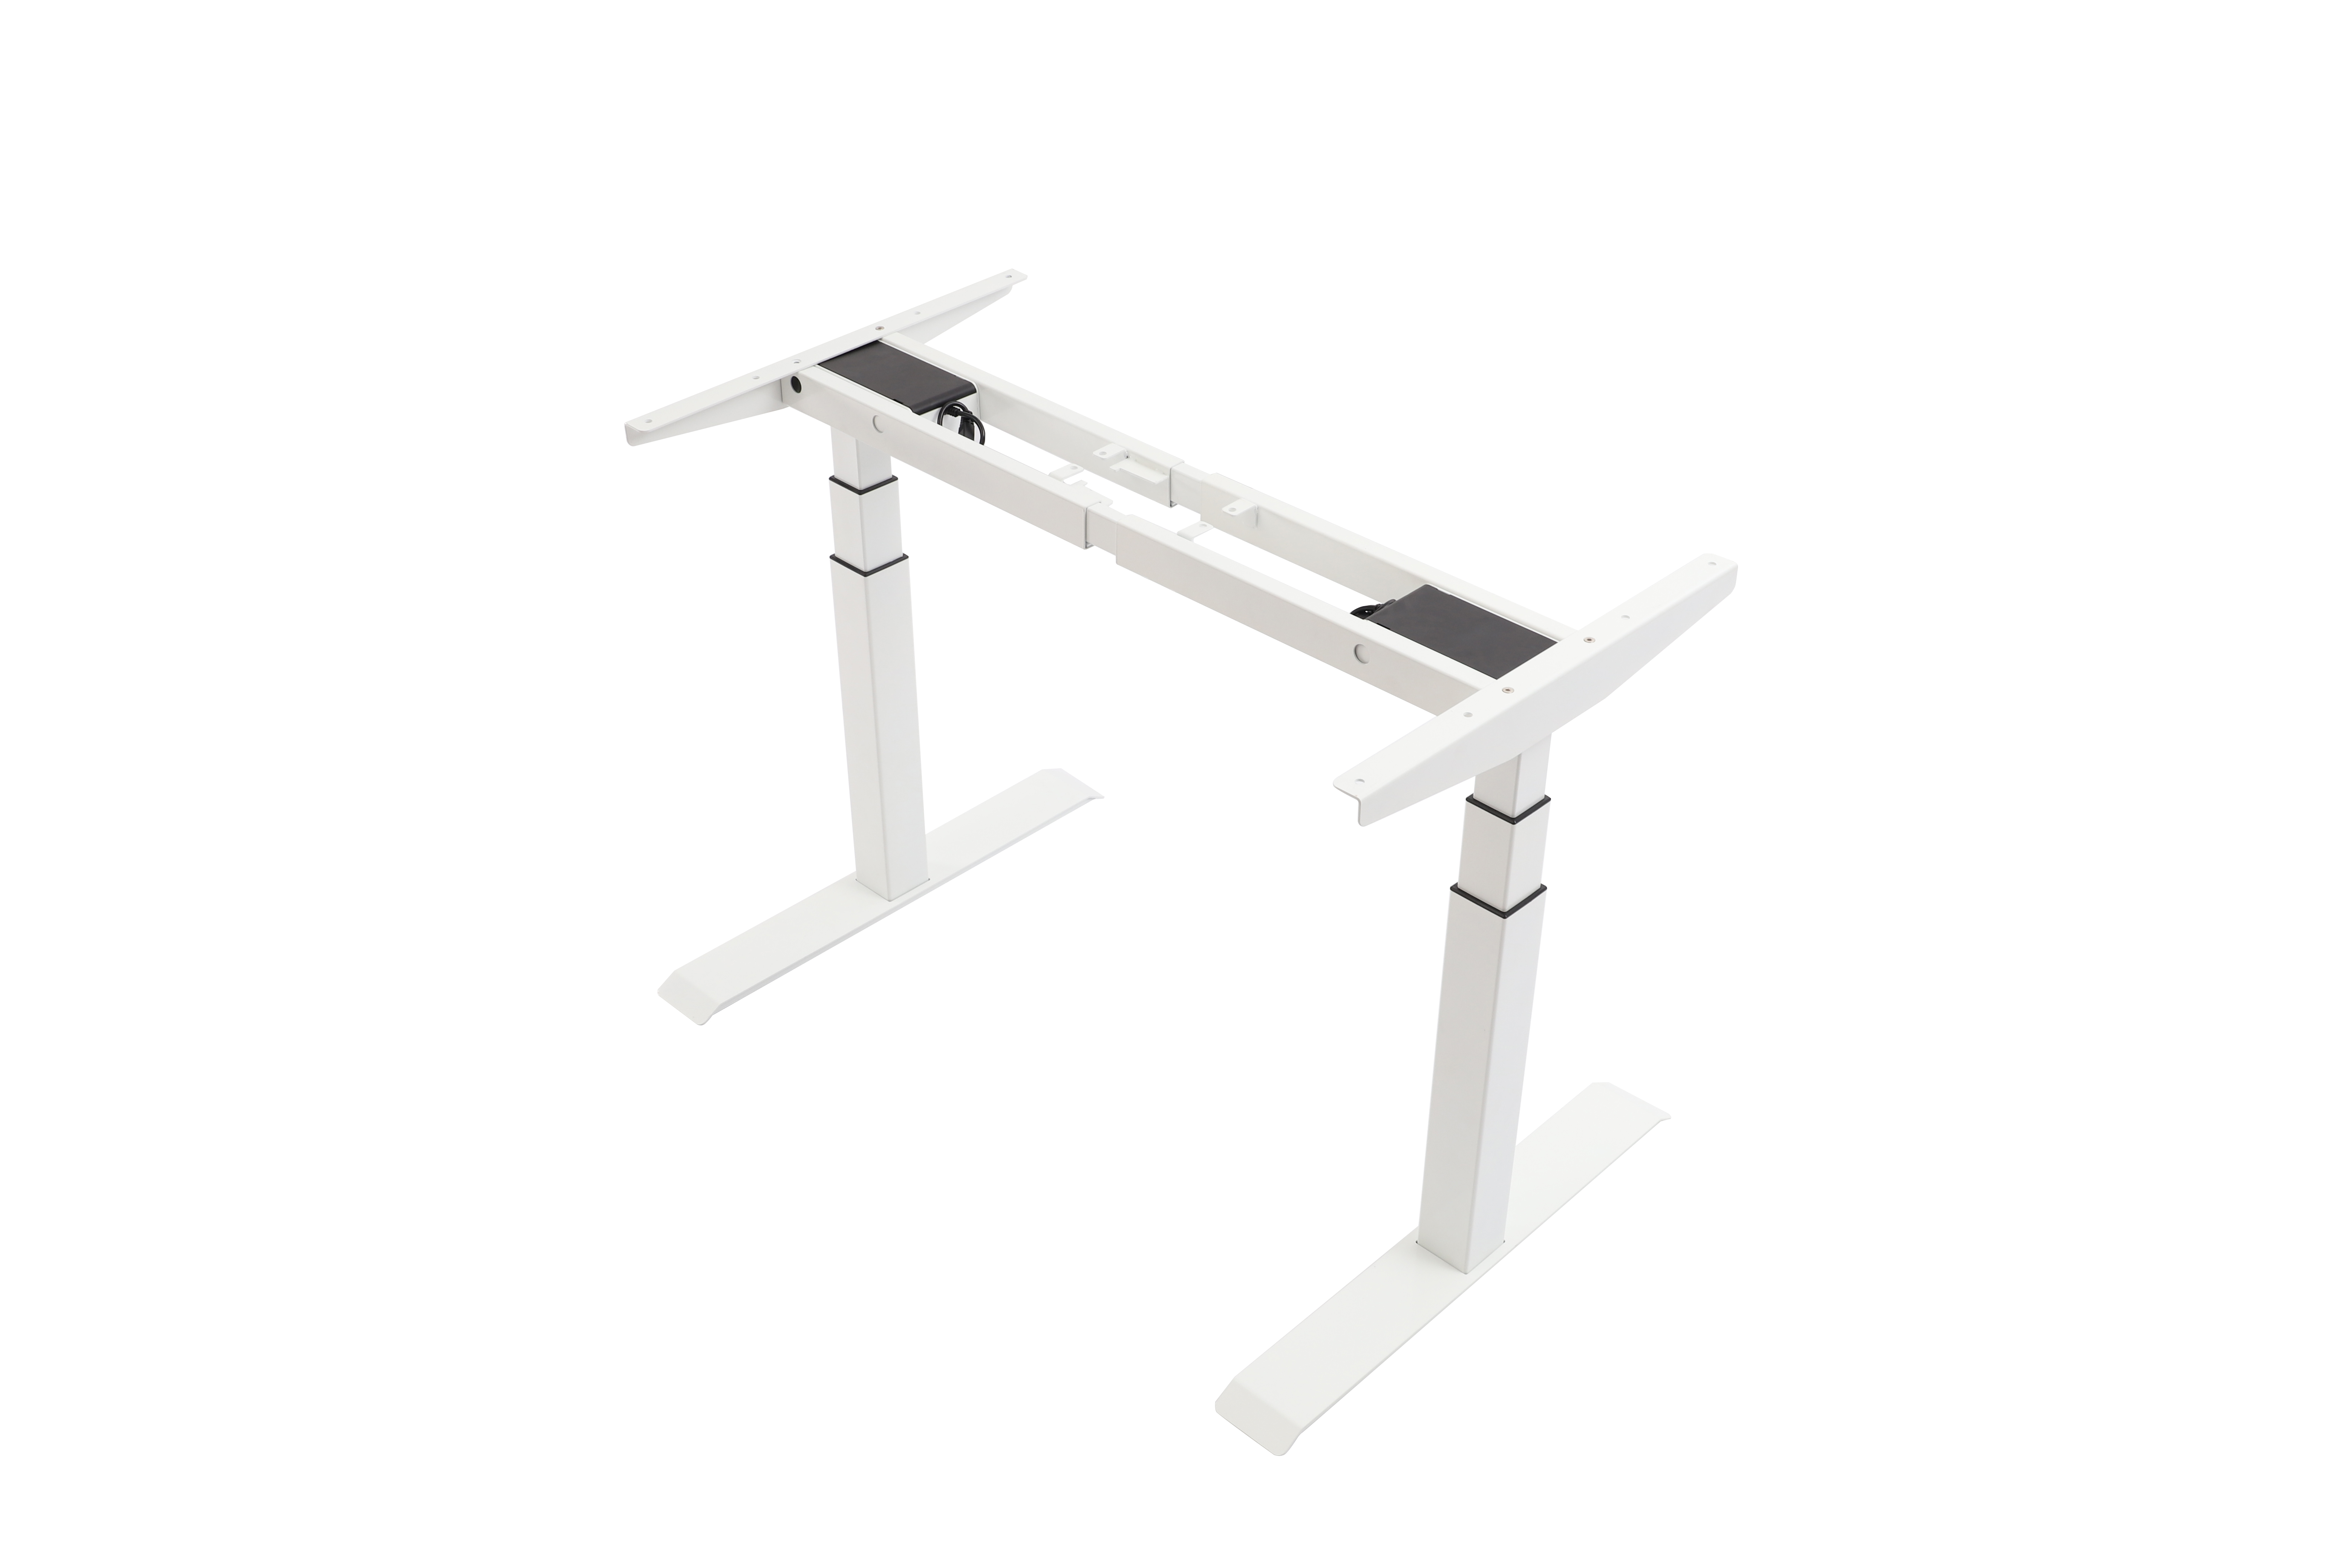 NT33-2B3 Standing Desk Electric Adjustable Sit Stand Office Desk Lift Table